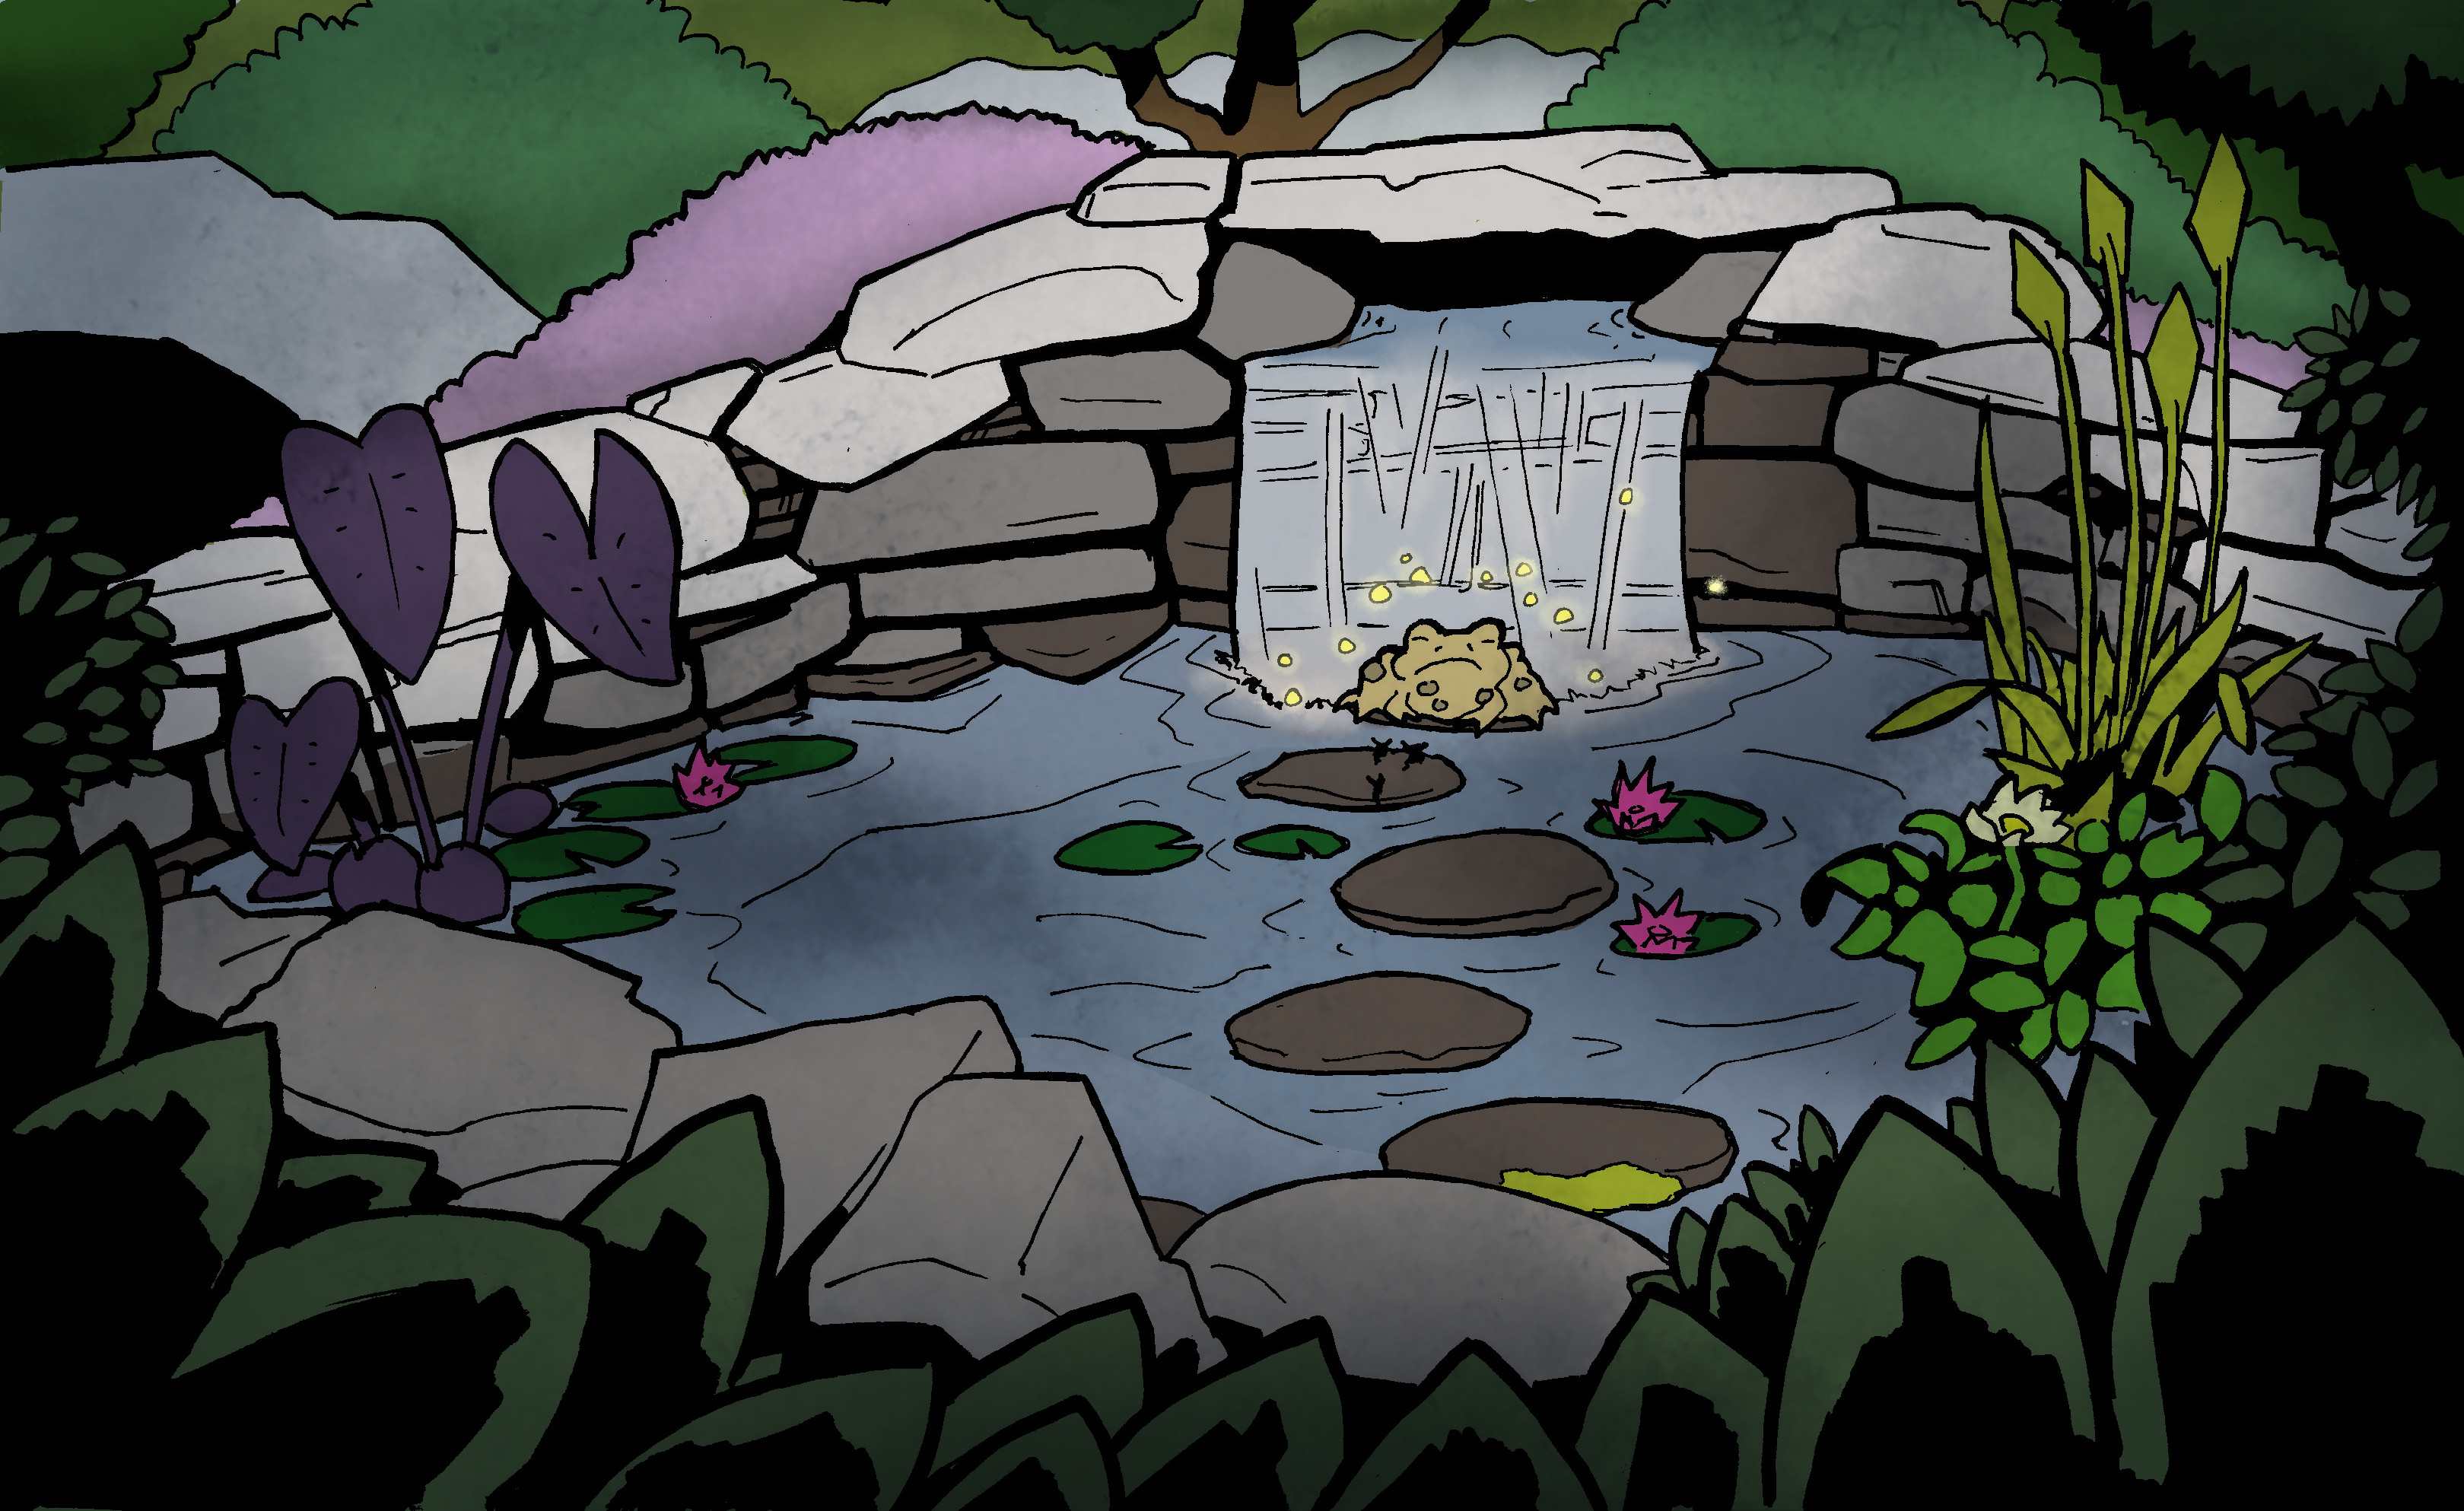 A pond surrounded by flowers, bushes, and trees us fed by a small waterfall. In the pond, a glowing toad is at the base of the waterfall, a path of stepping stones leading up to it, and three small silhouetted mice can be seen on the stepping stone closest to the toad.